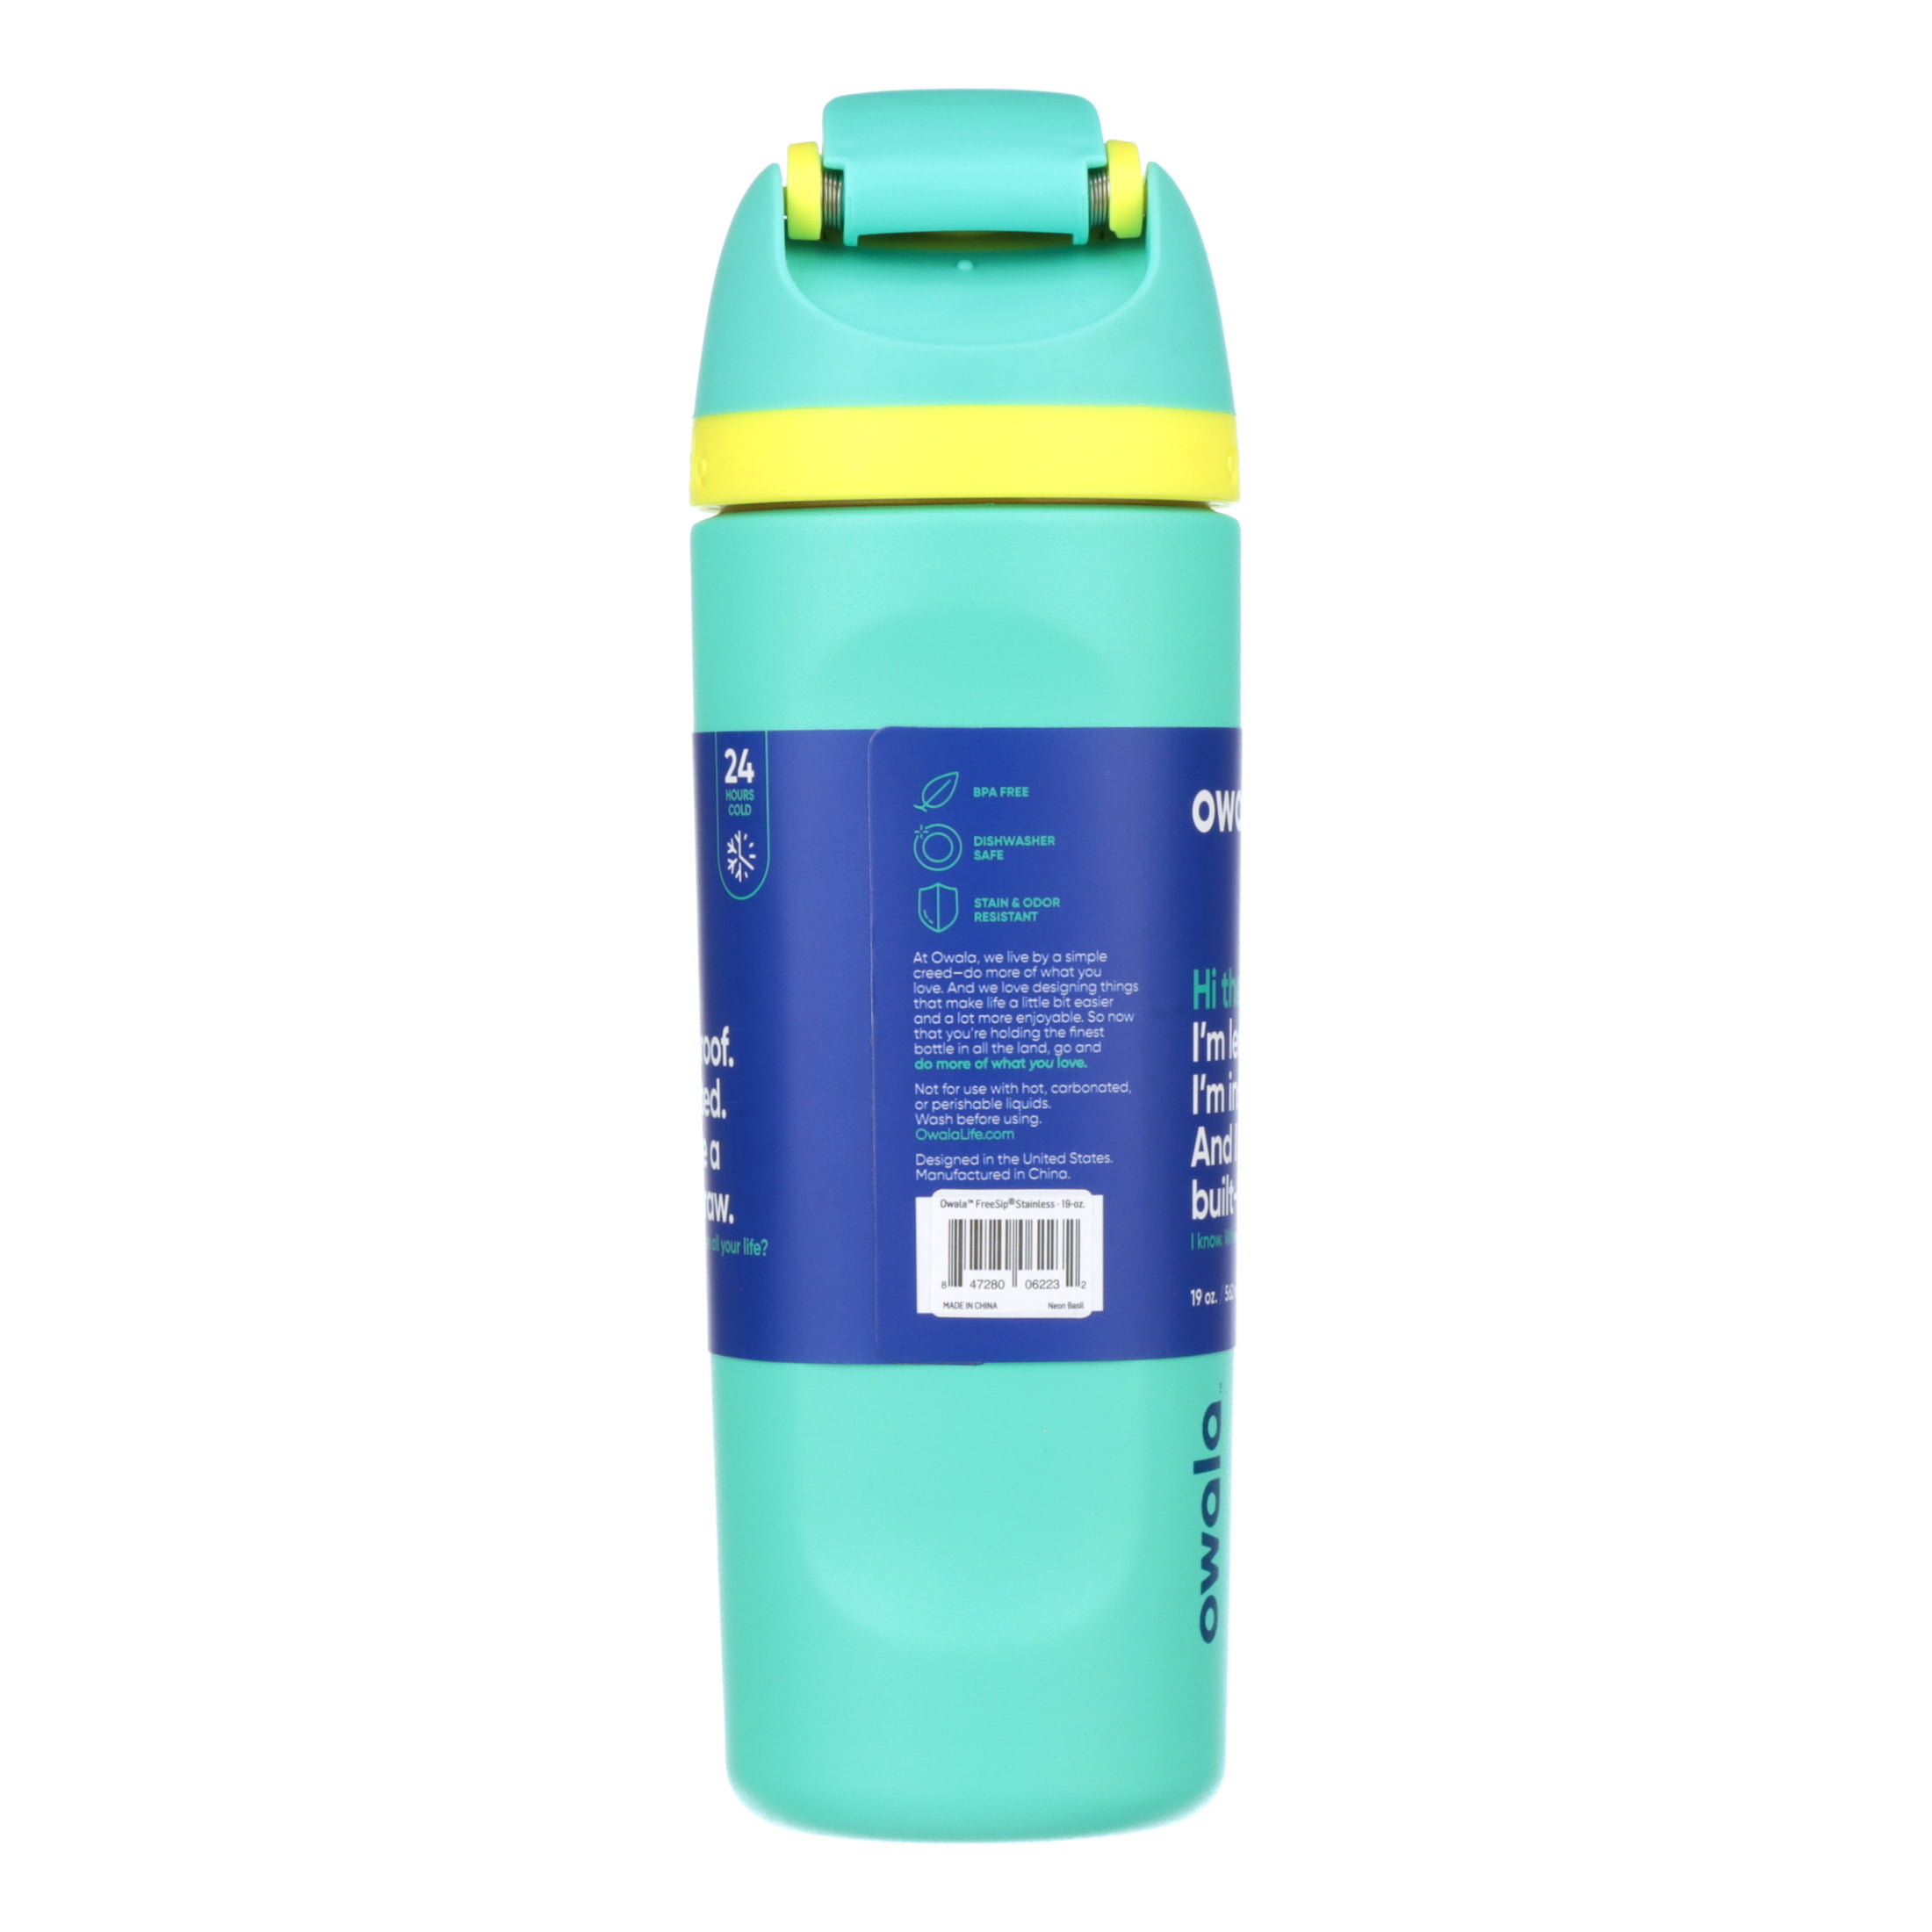 FREE Owala 19oz FreeSip Bottle + FREE Shipping on March 16th - Get Ready! -  Budget Savvy Diva